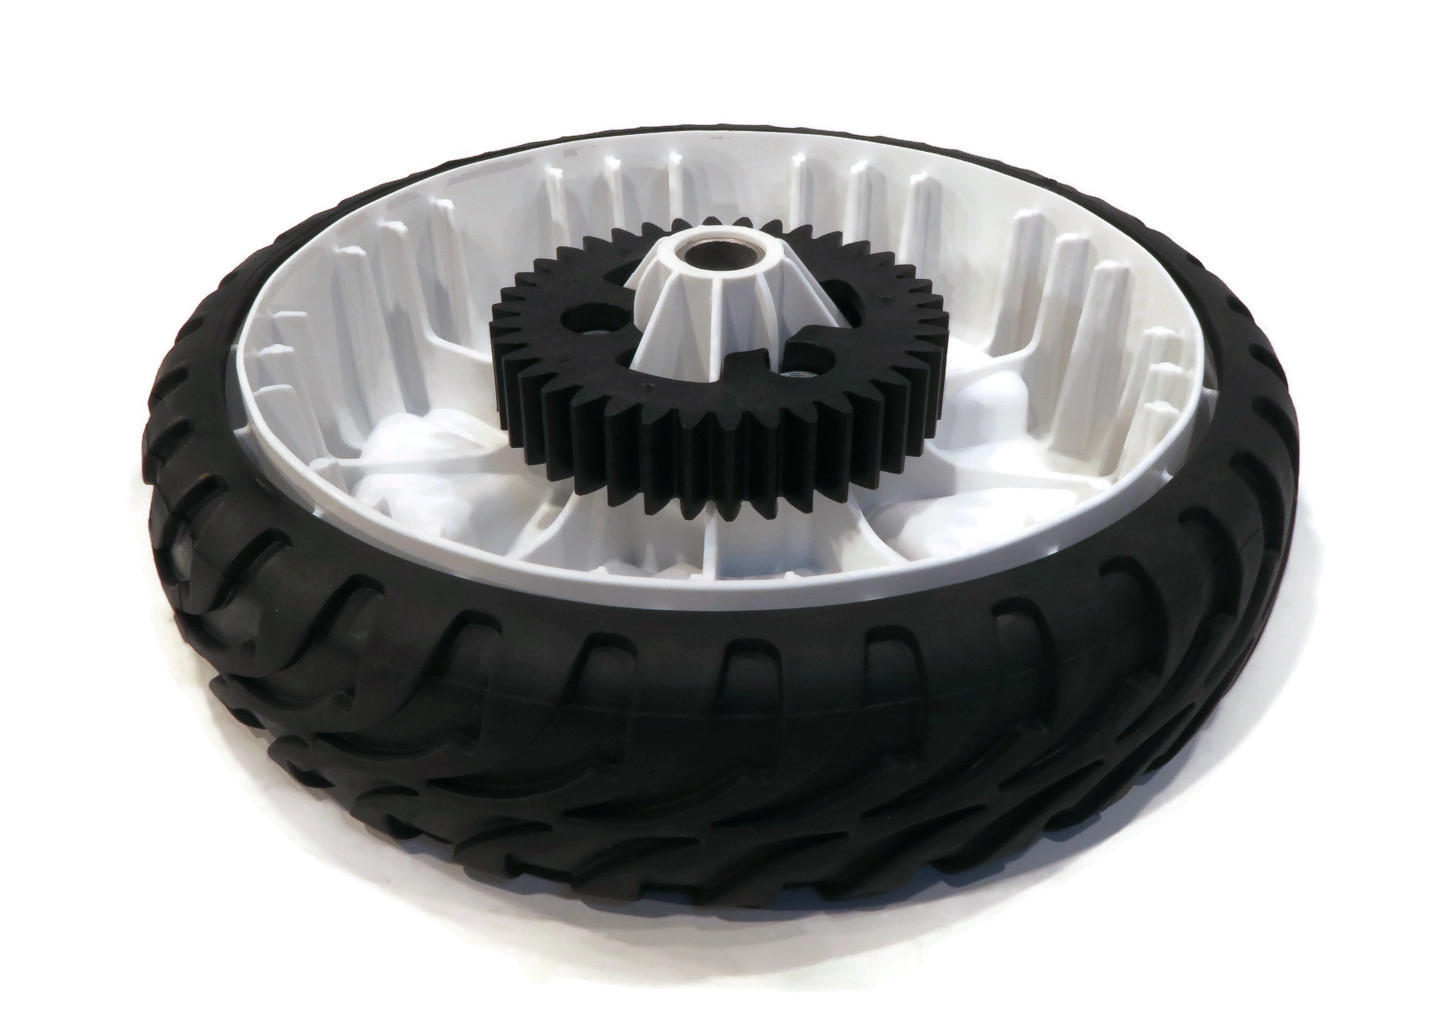 The ROP Shop | (2) TORO OEM Wheel Gears For 20332 20333 20334 20352 20372 20373 RWD Lawn Mower. TRS Part Number: 1011720002 - image 5 of 7